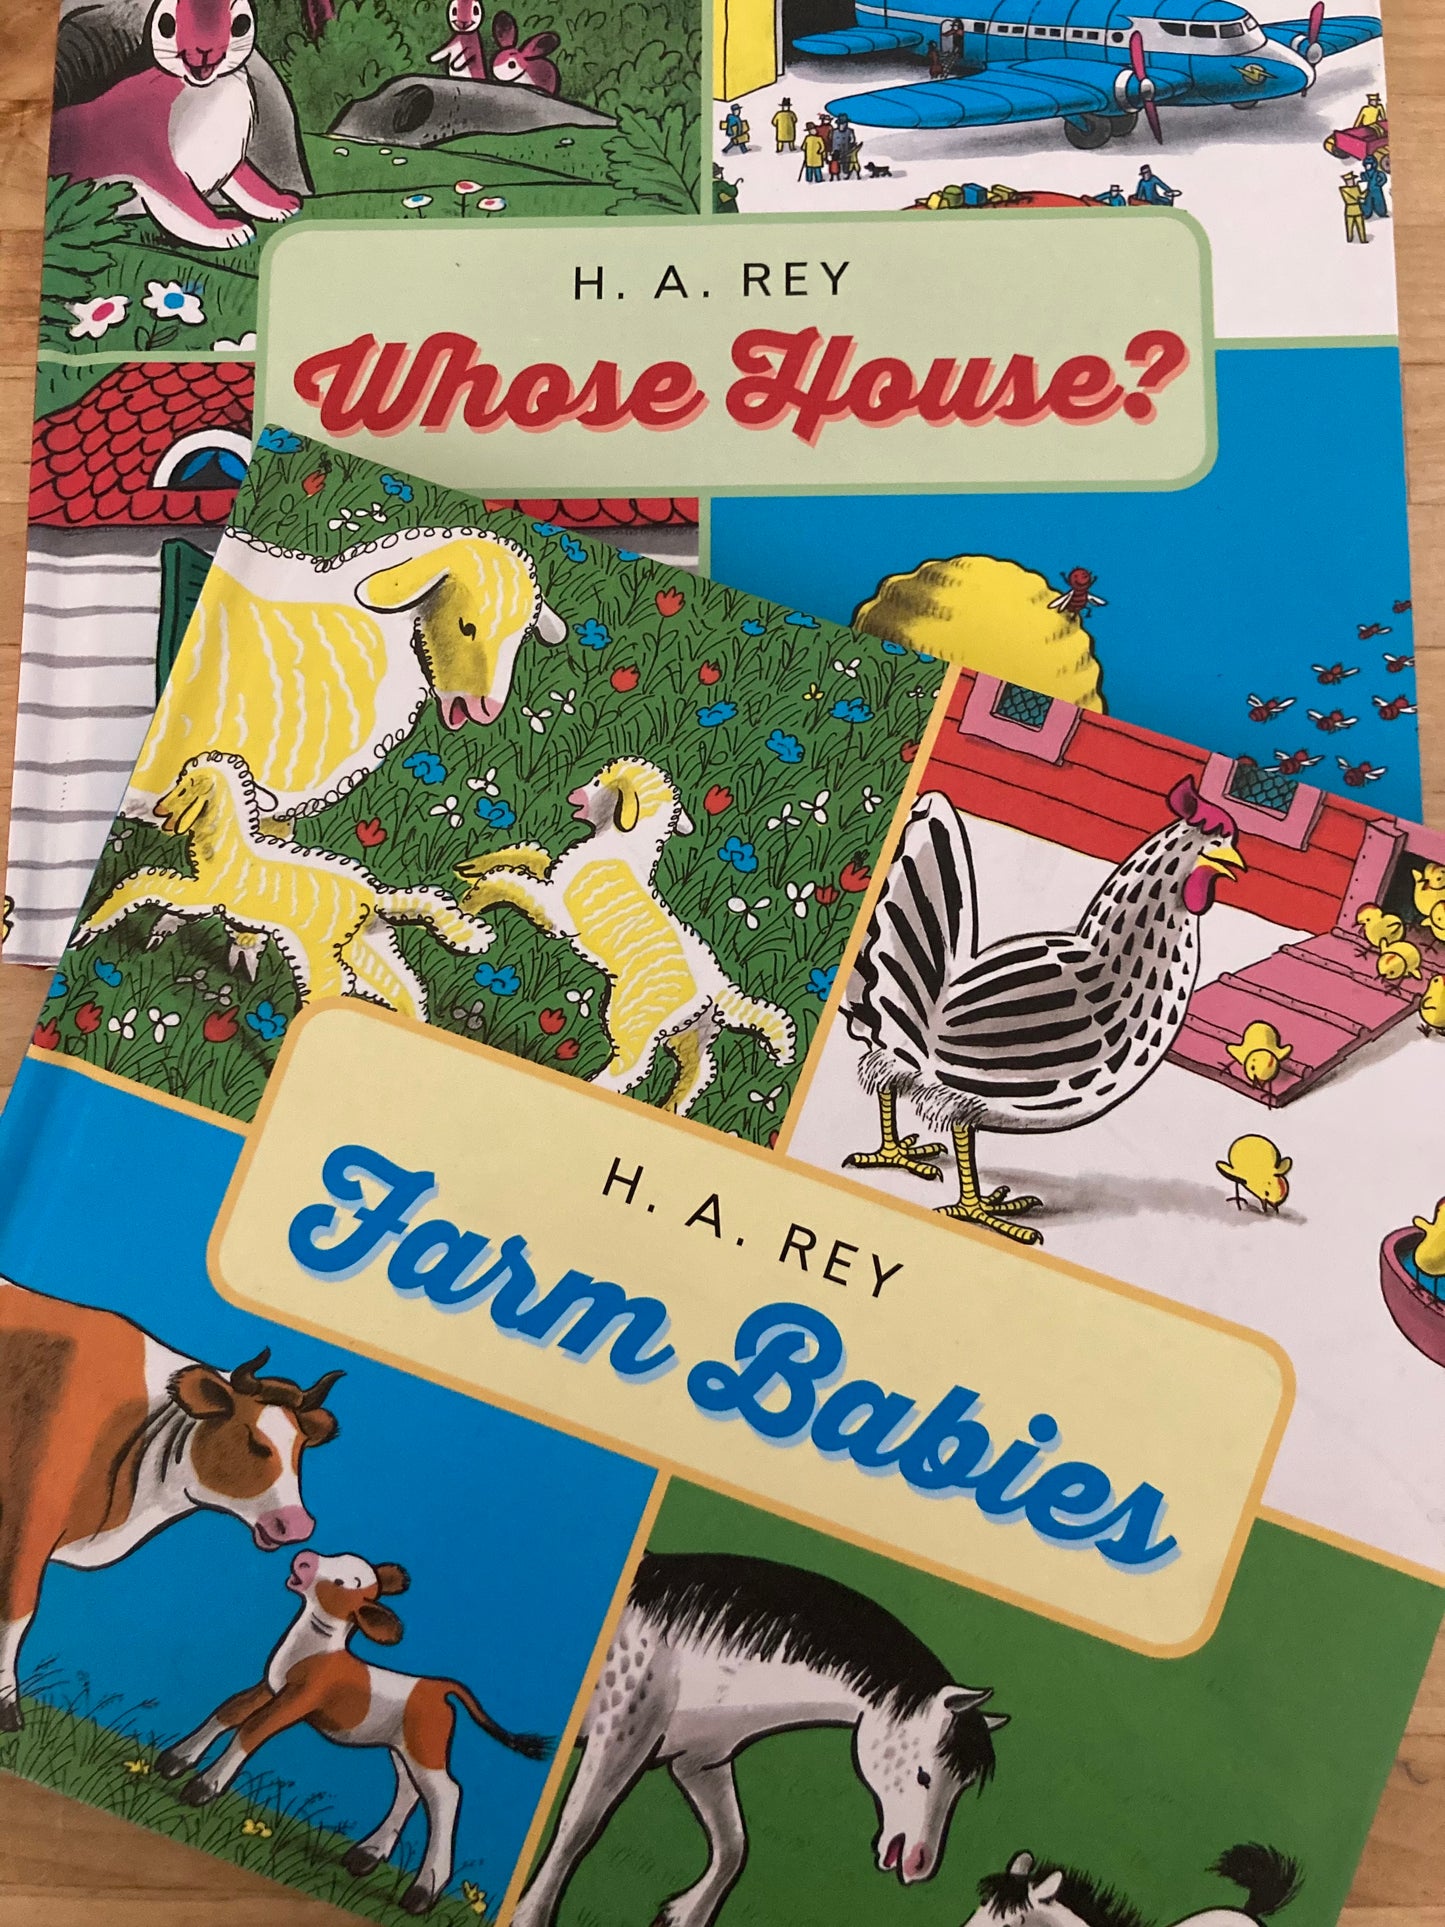 Children’s Picture Book - FARM BABIES by H.A.Rey